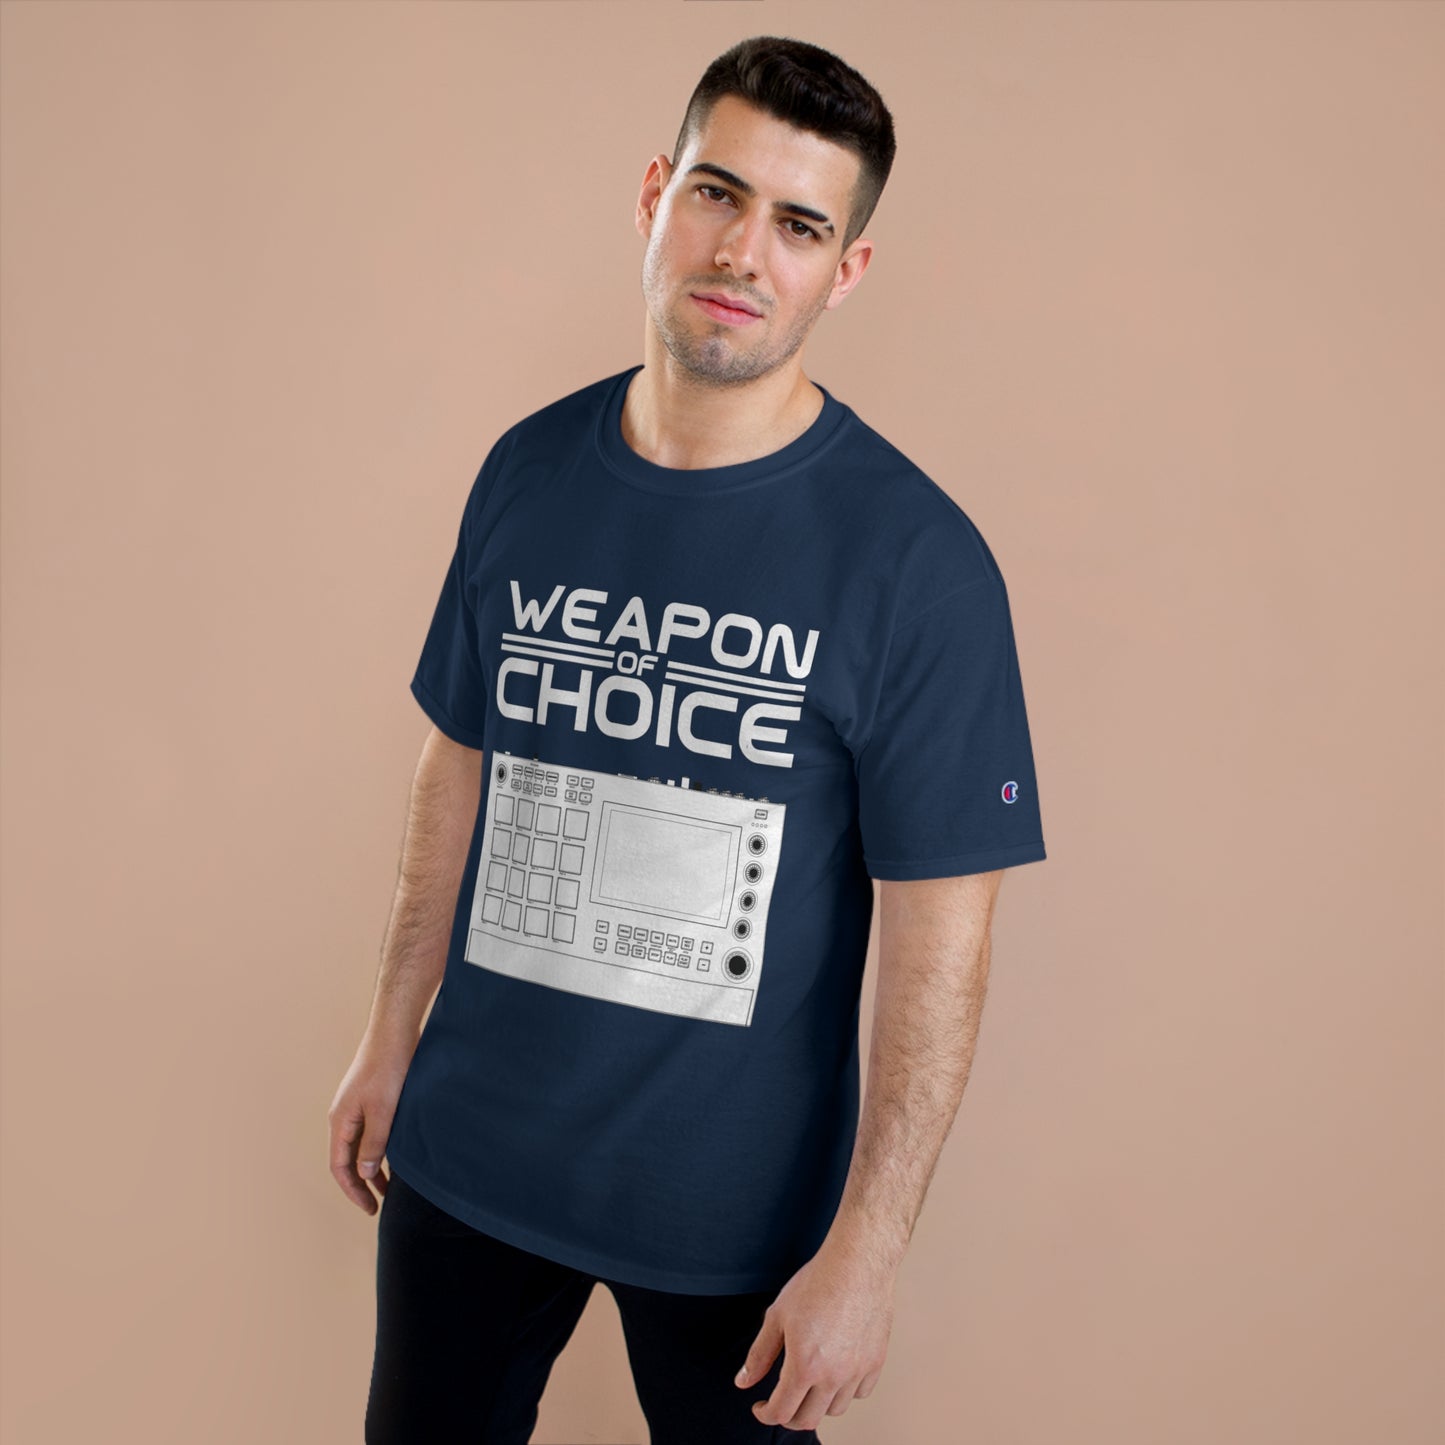 Weapon Of Choice Live 2 Champion T-Shirt